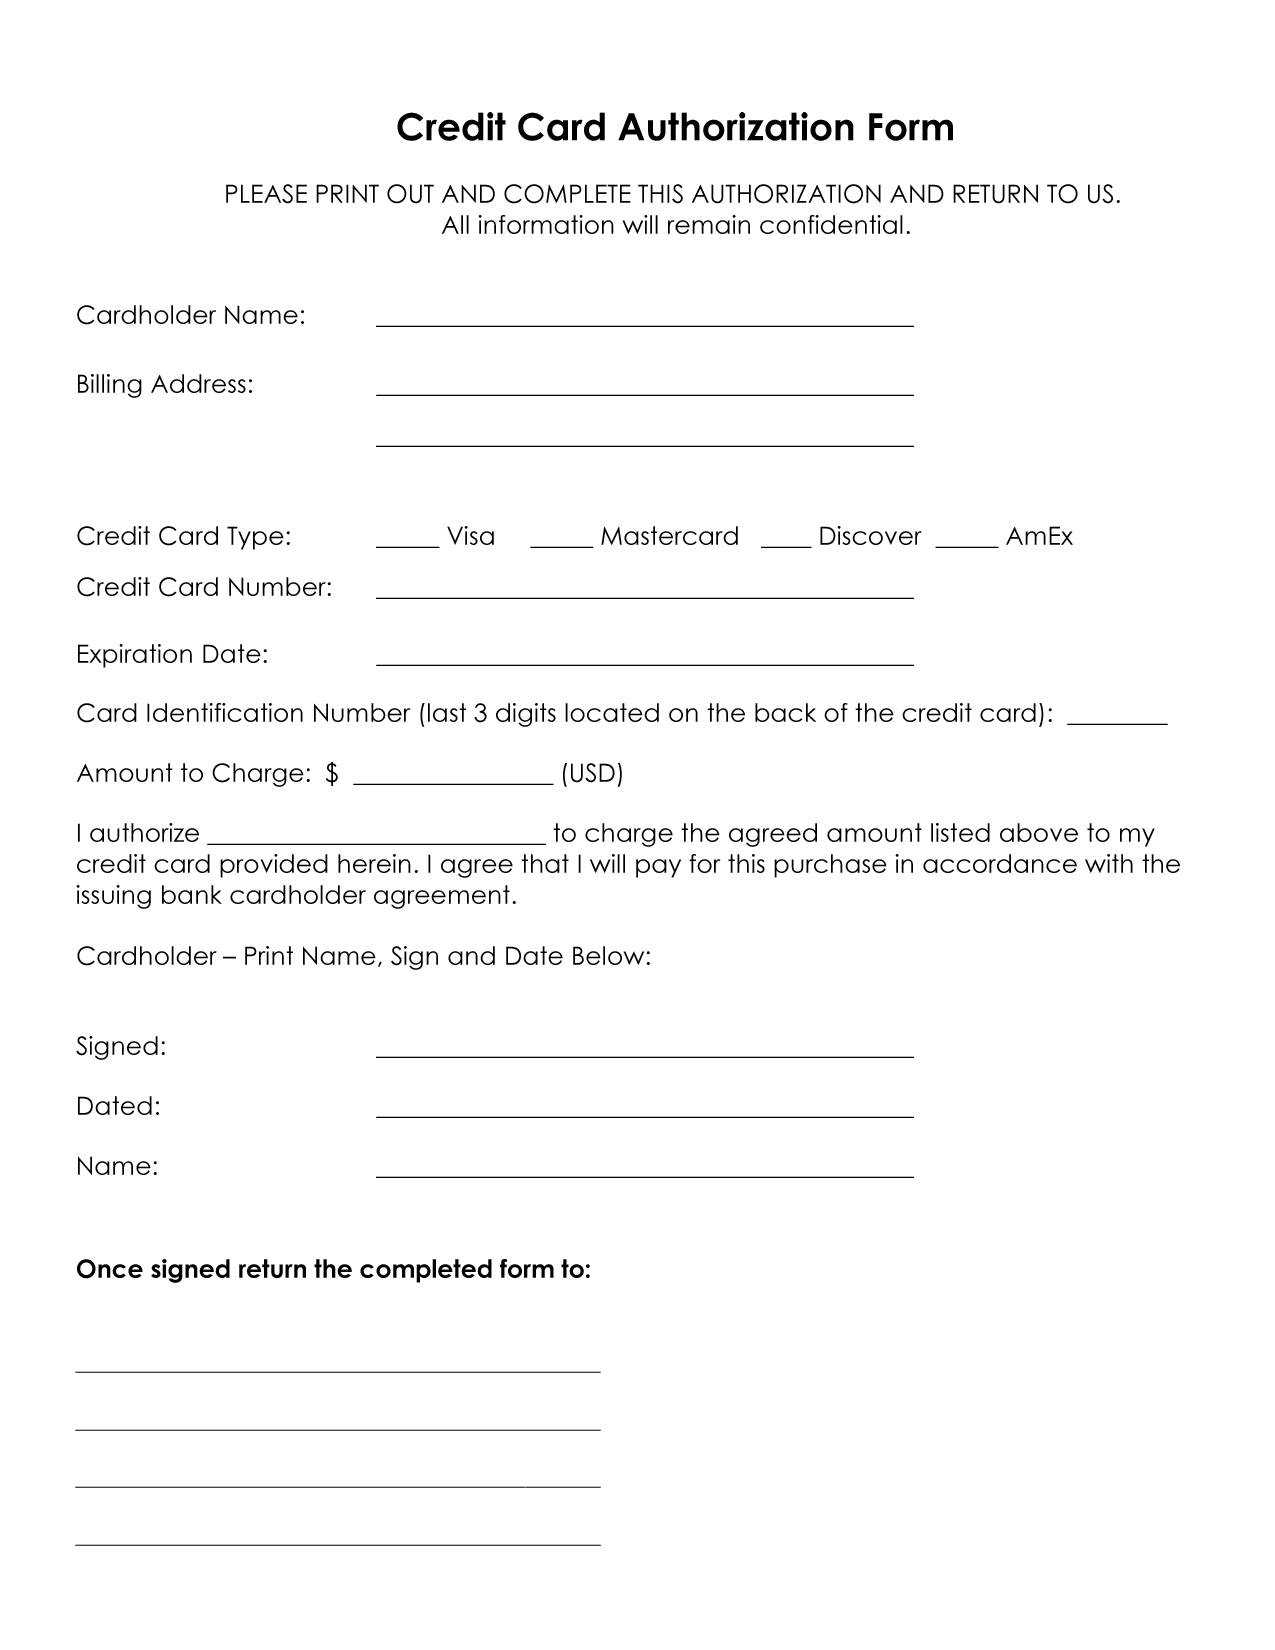 Credit Card Authorization Form Template Processing Example Throughout Credit Card On File Form Templates